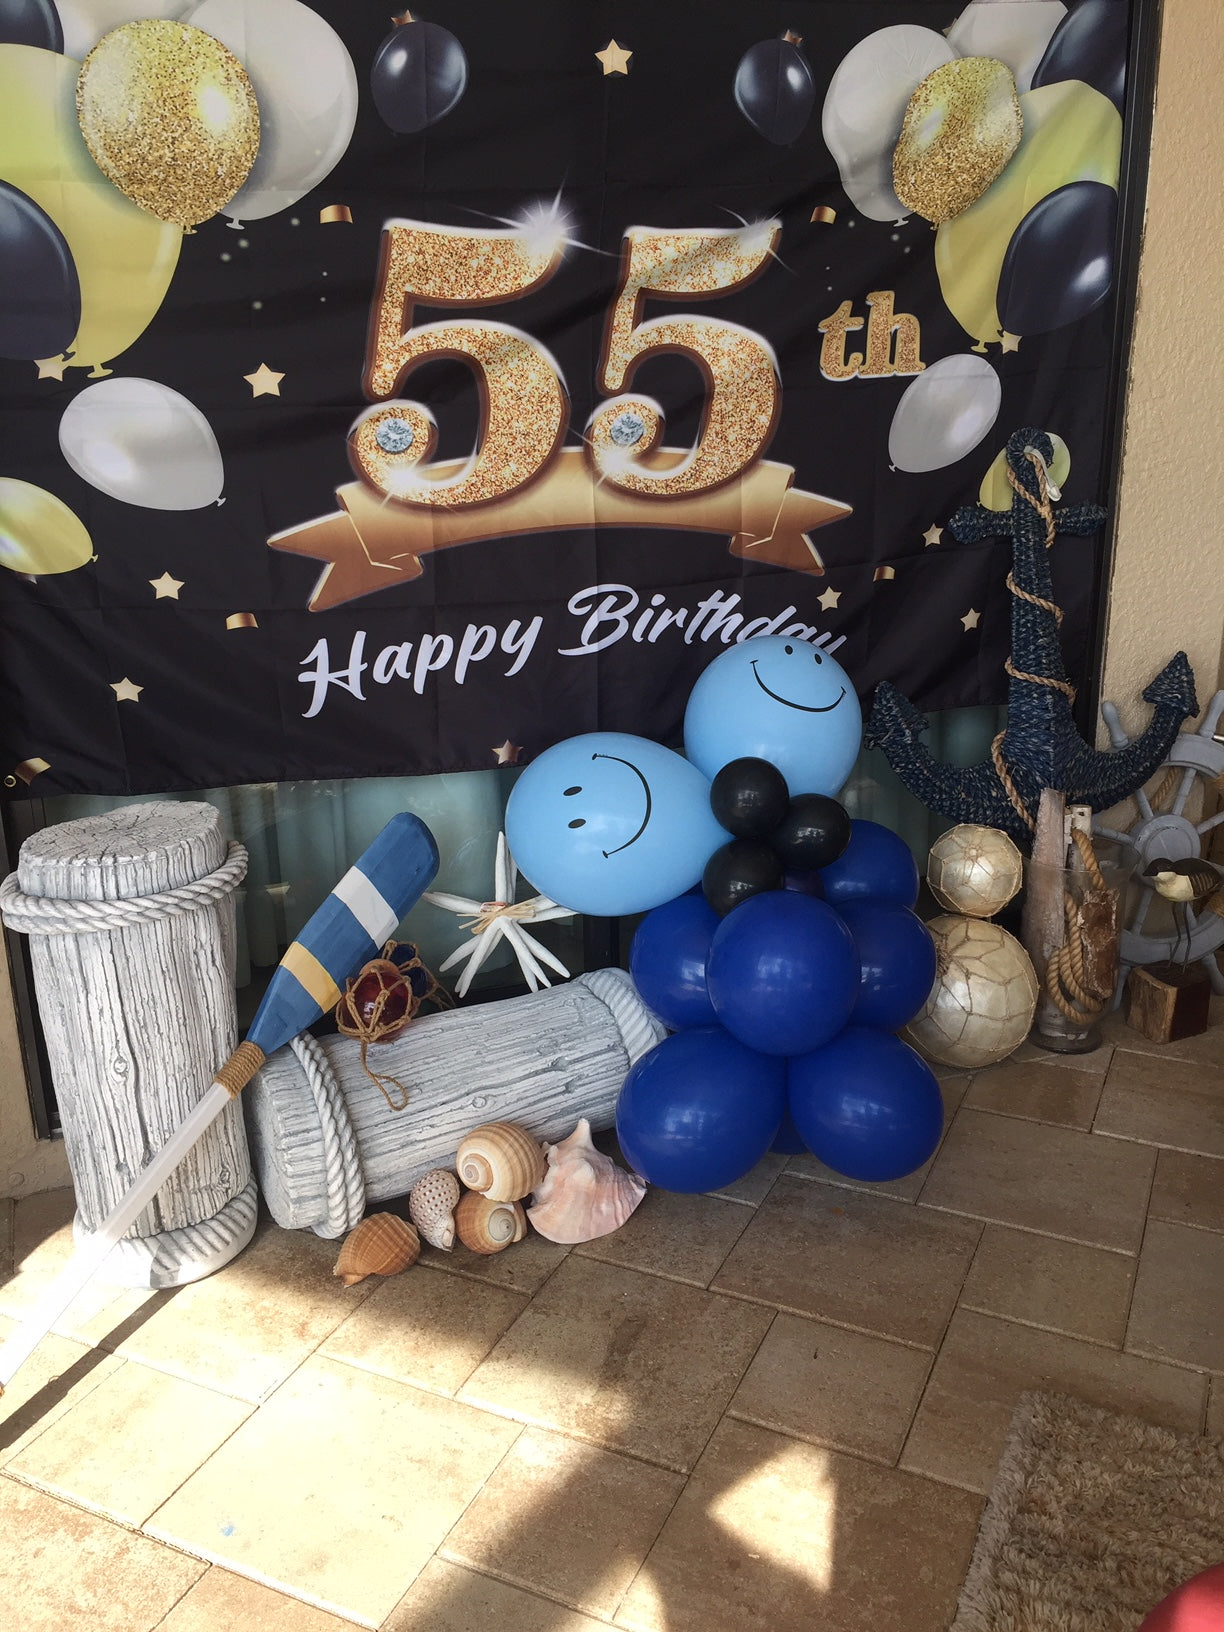 Nautical Themed Birthday Backdrop  IV Gifts & Affordable Wedding – IV  Gifts & Affordable Weddings